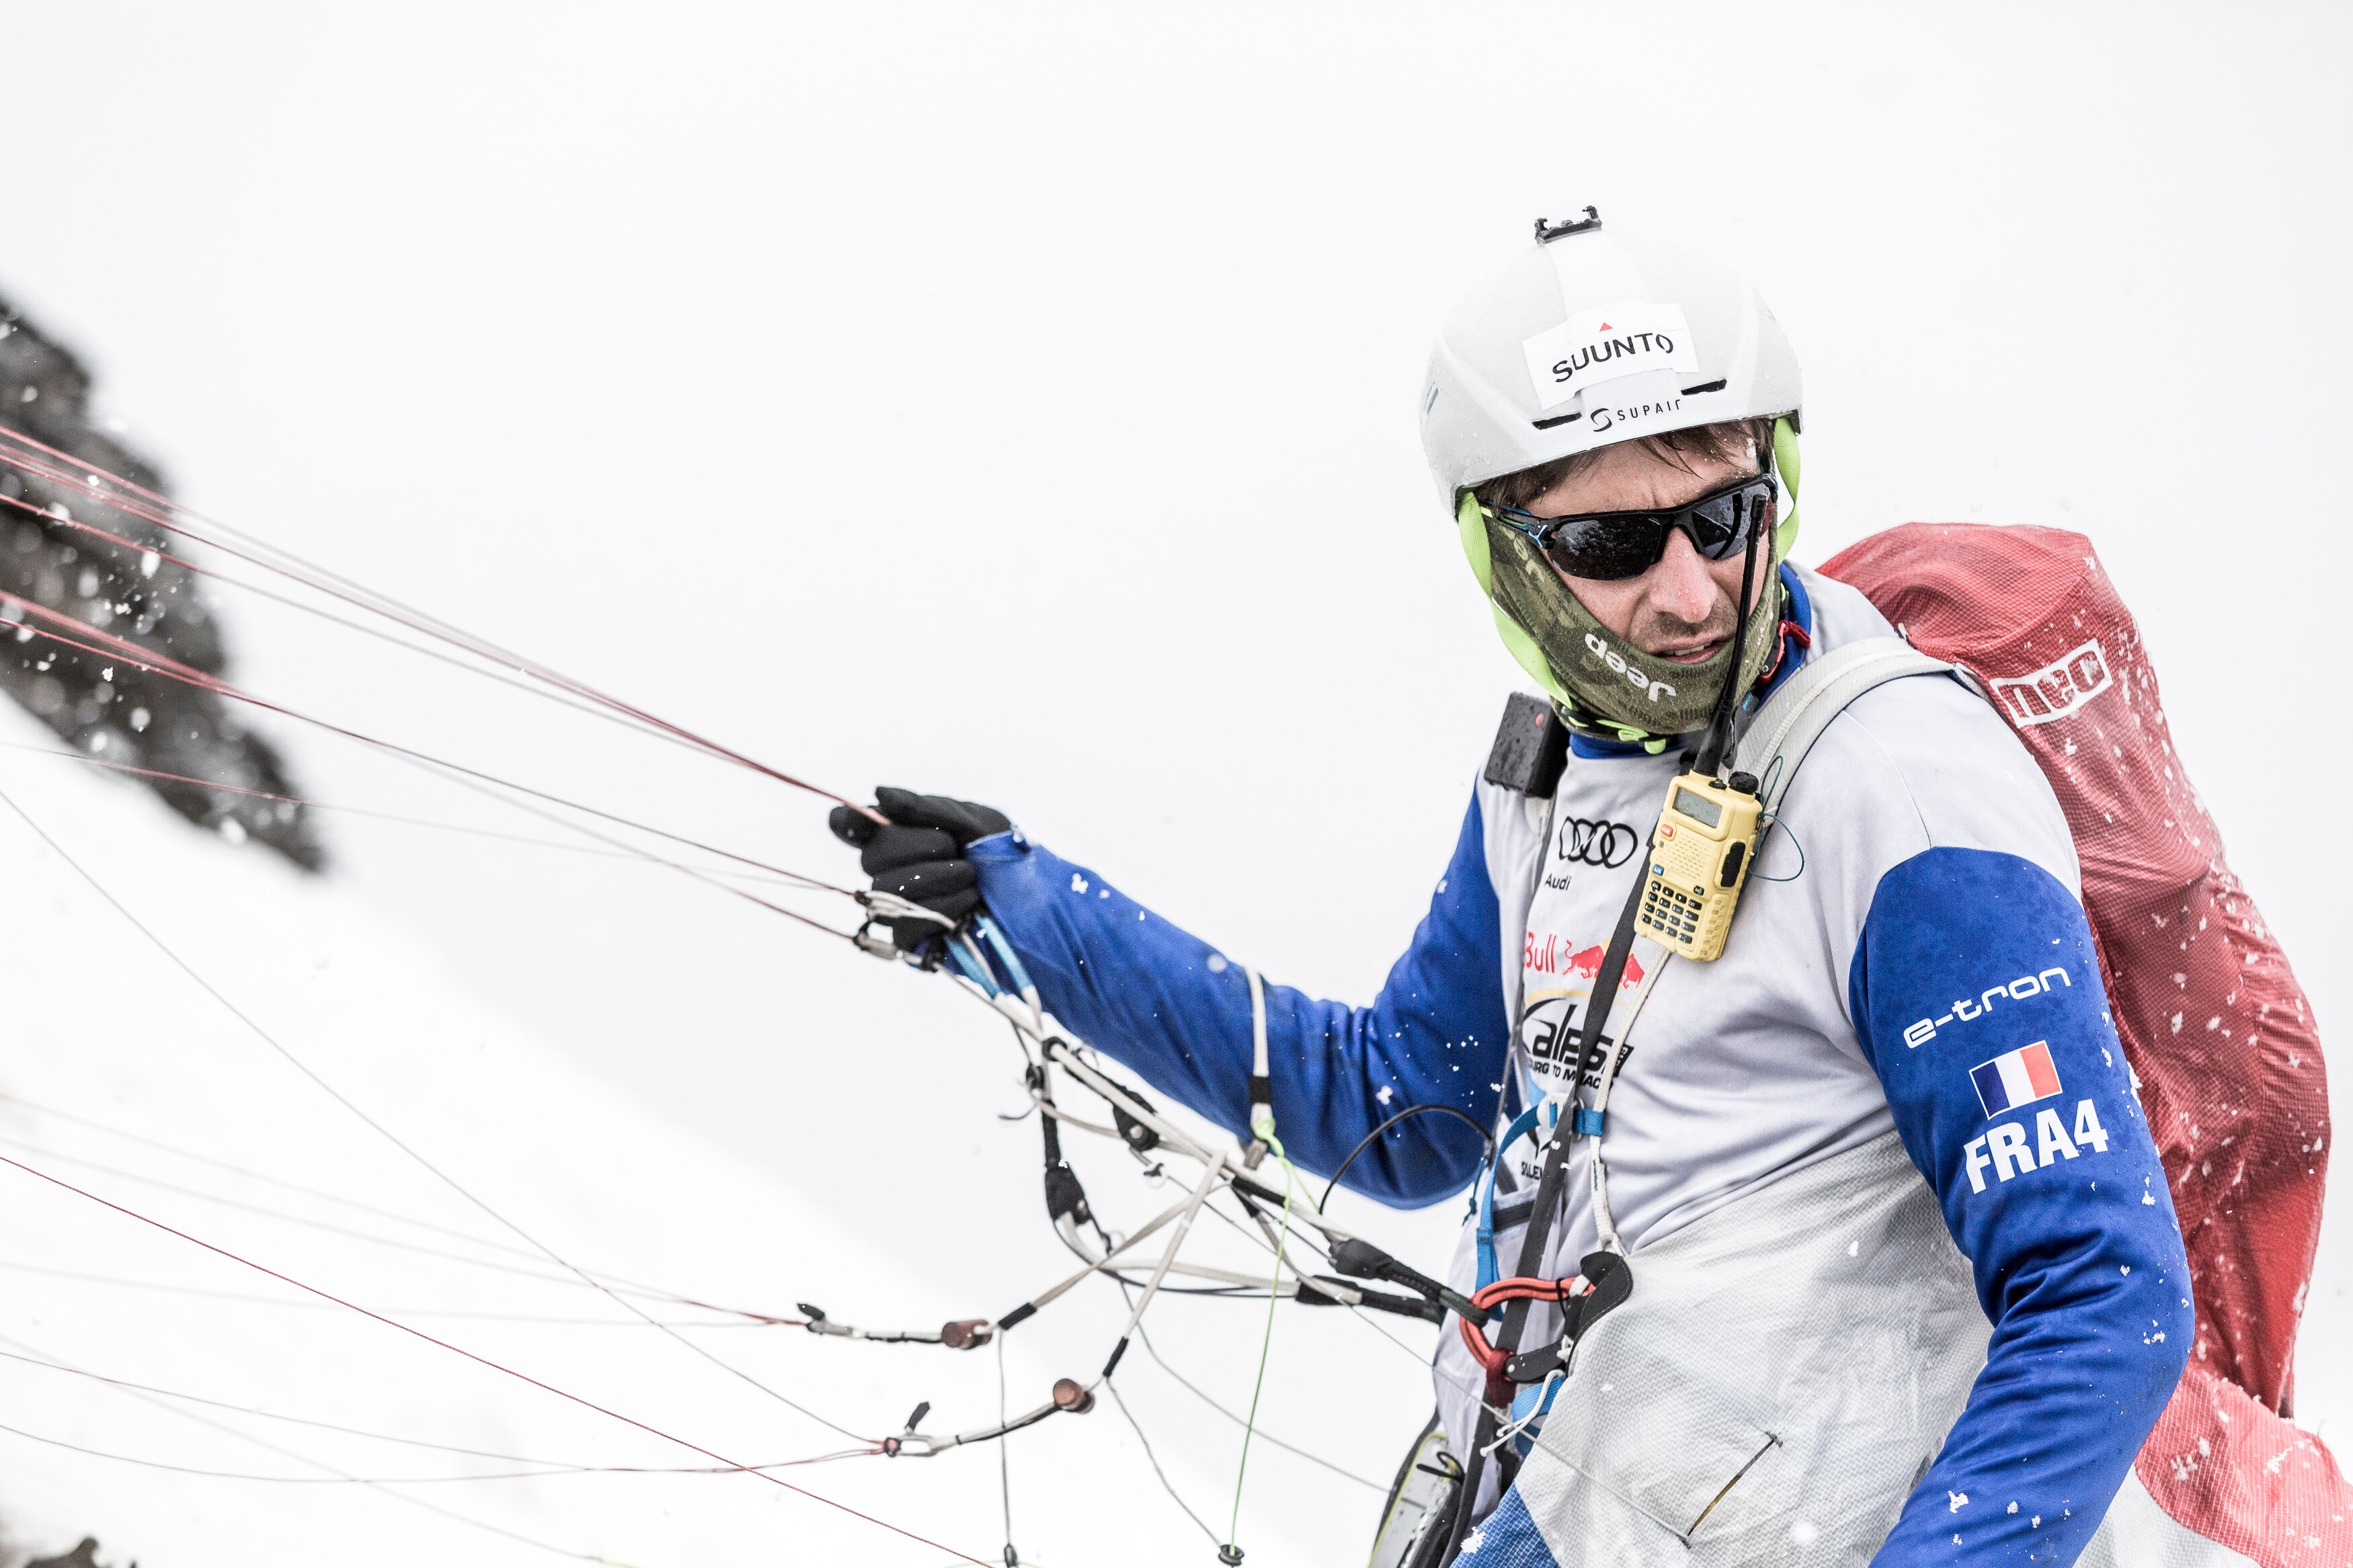 Maxime Pinot (FRA4) prepares to launch during the Red Bull X-Alps at Turnpoint 7, Titlis, Switzerland on June 20, 2019